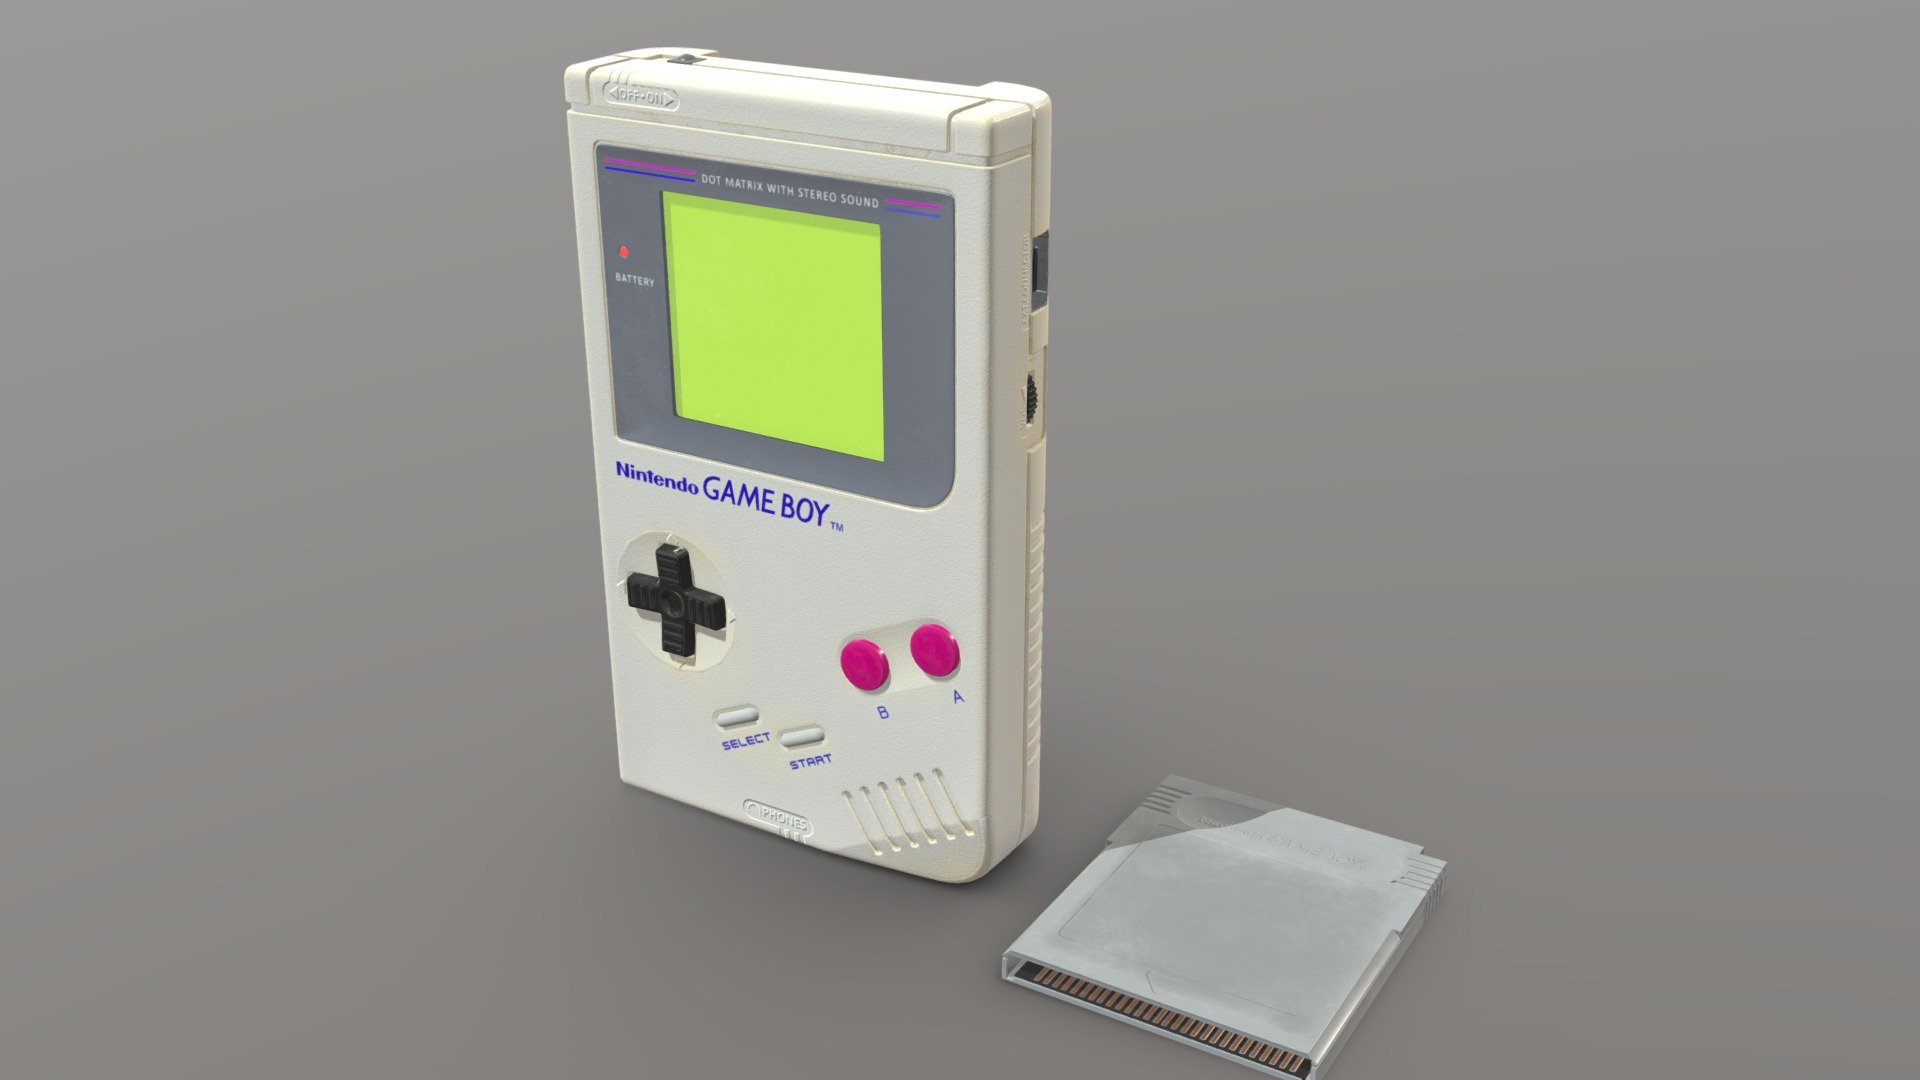 Some issues with normal mapping on Sketchfab, idk how to fix them. Everything is fine in Substancec4d

Low poly game ready 3D model of Gameboy 1989 with unwrapped UVs and PBR textures

Textures resolution: 4096 x 4096px; format: .png

The file contains the following formats: .c4d, .3ds, .fbx, .obj, .png

Textures set includes:

PBR Metallic Roughness: BaseColor, Roughness, Metallic, Normal, Height, Opacity, Emission

Made in Cinema 4D R19, RizomUV, Substance Painter - Nintendo Gameboy 1989 low poly PBR - 3D model by animator2205 3d model